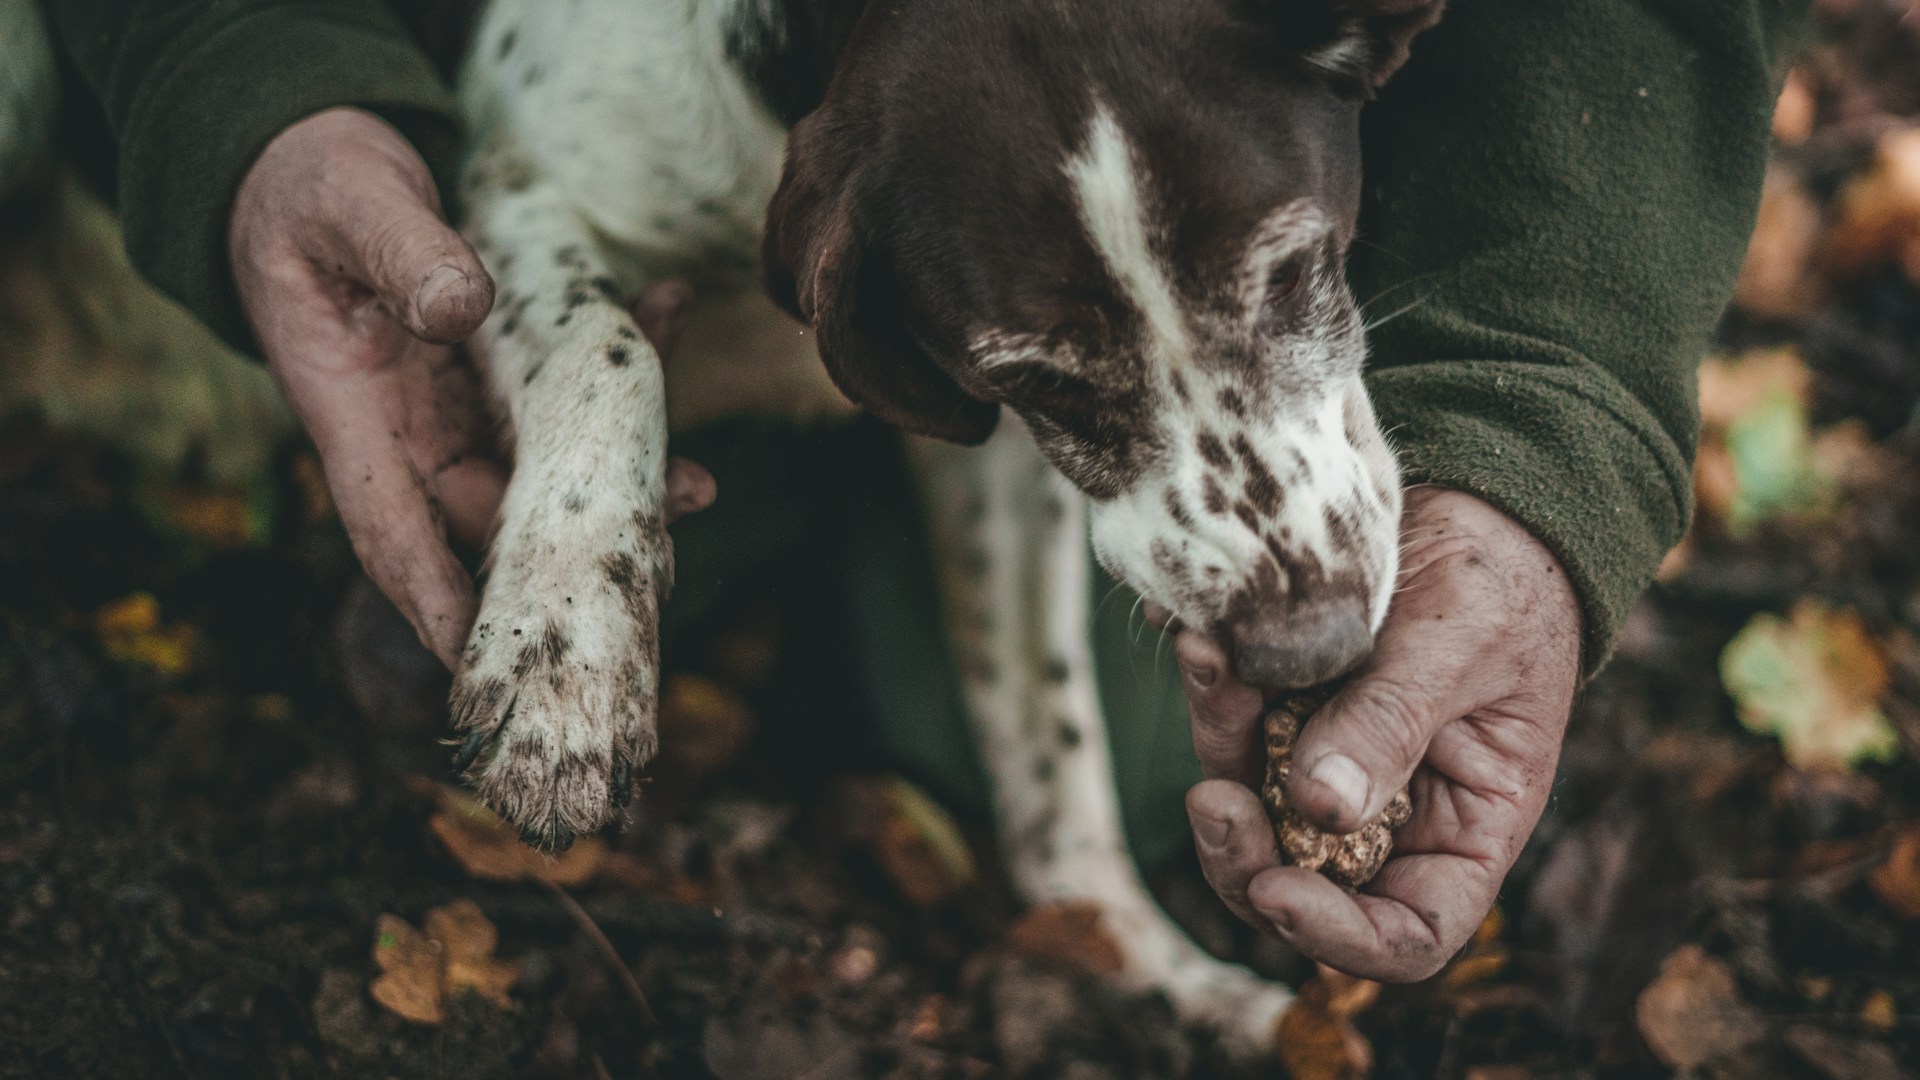 Close up of a truffle hunting dog sniffing a man's hand